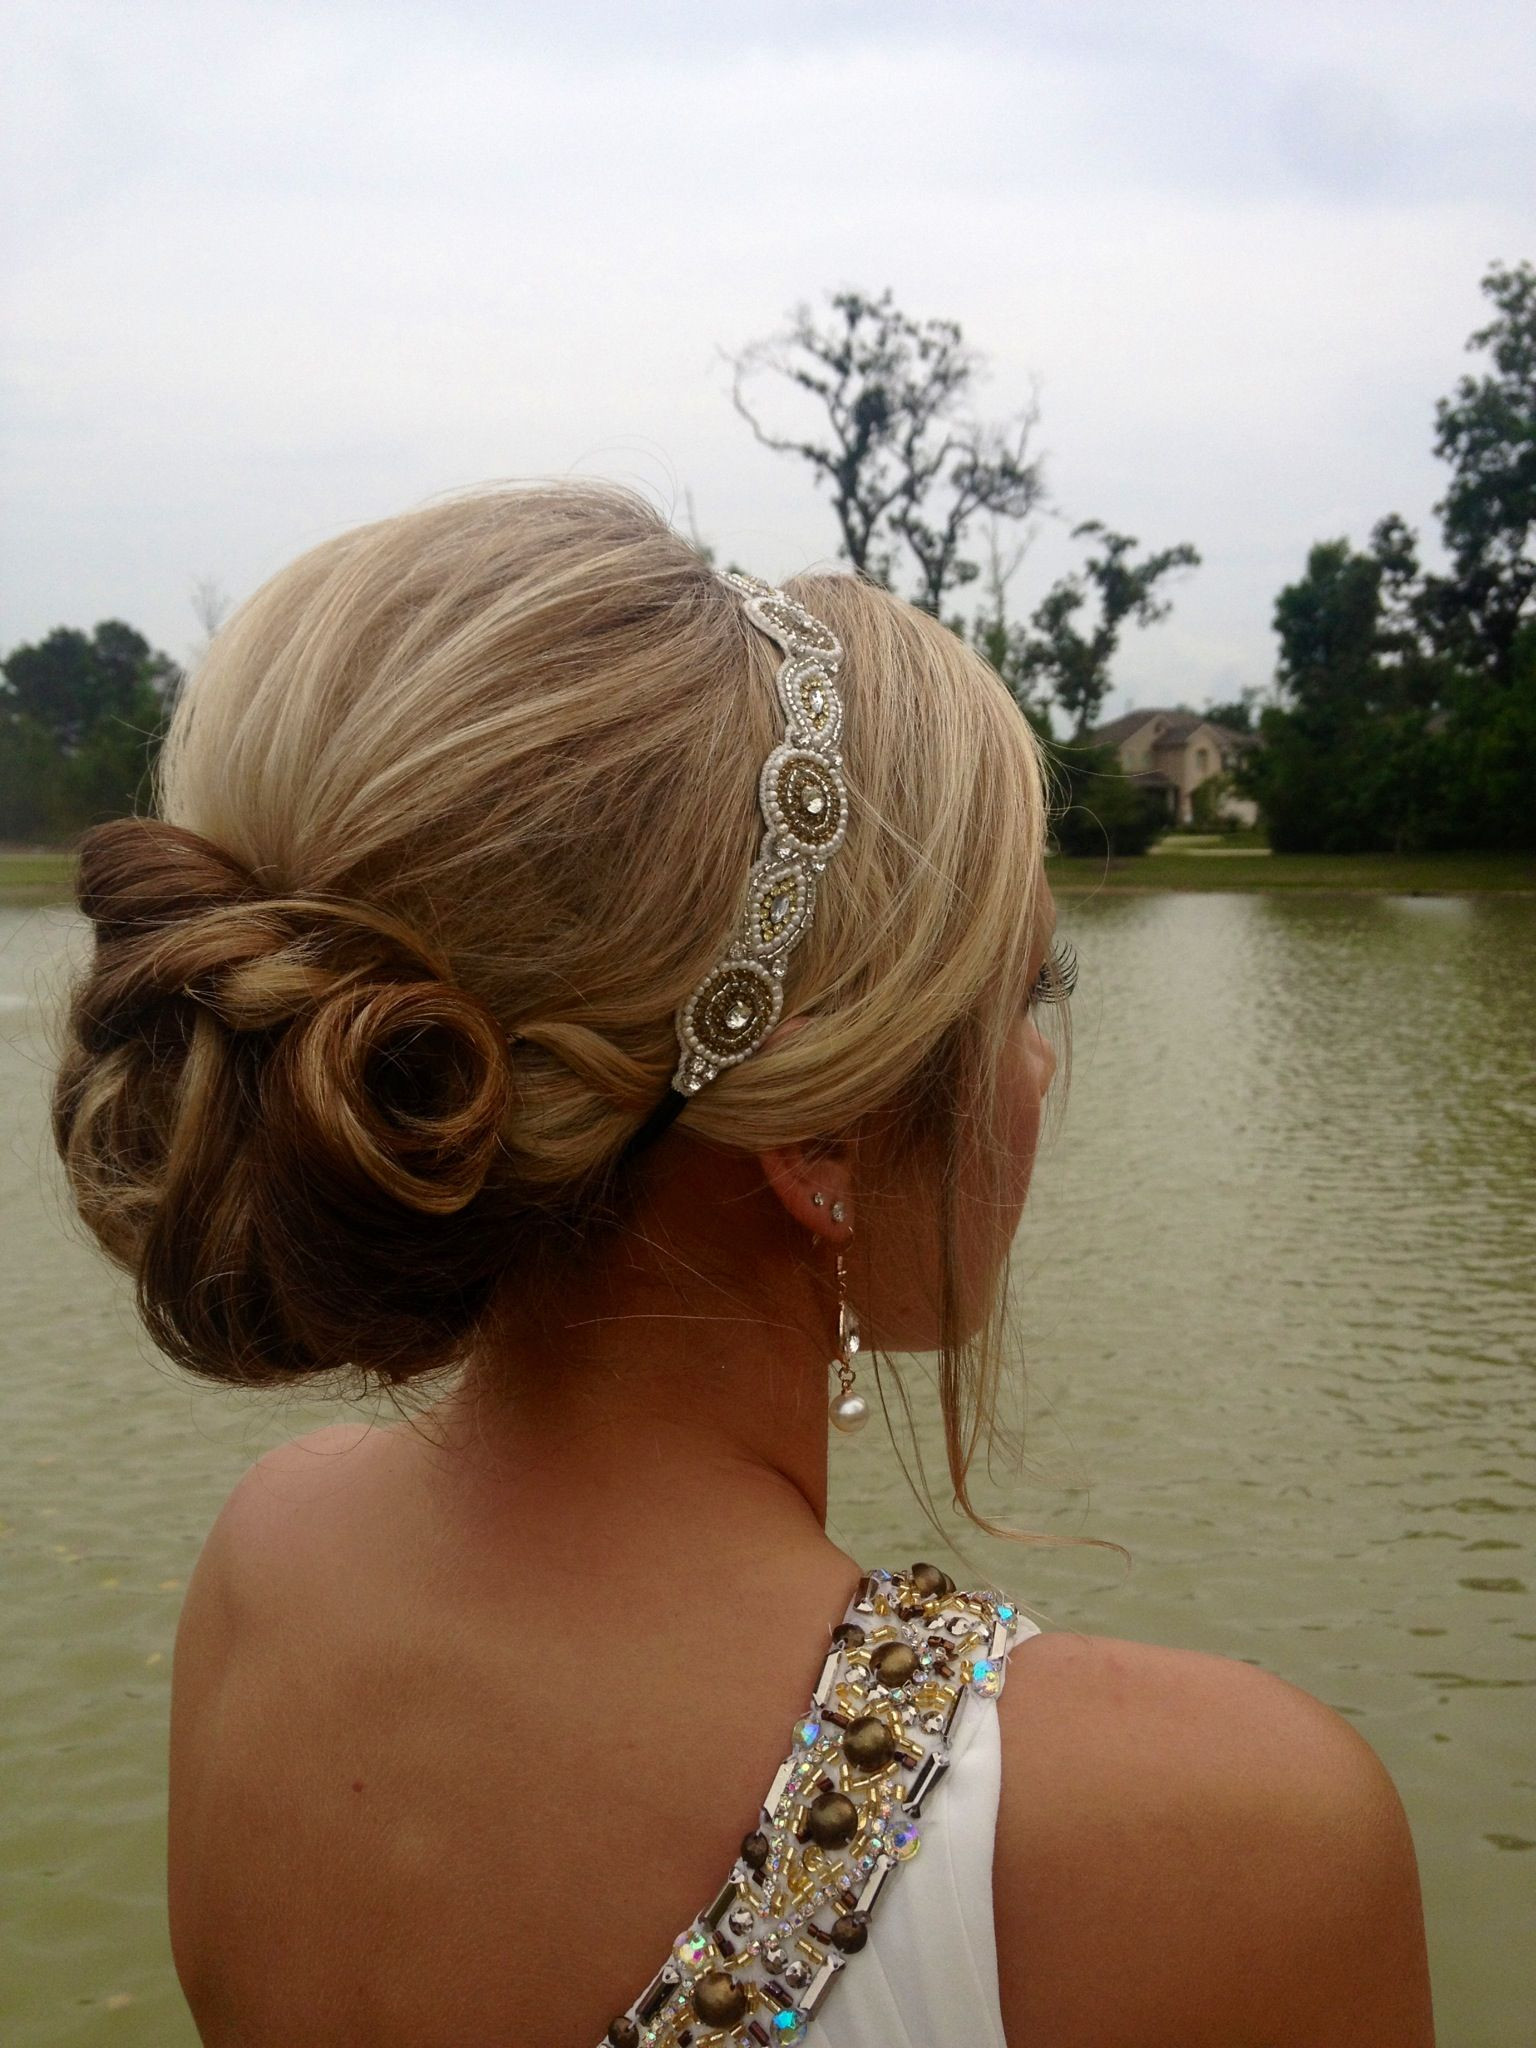 Prom Hairstyles With Headband
 This is going to be my prom hair Alyssa